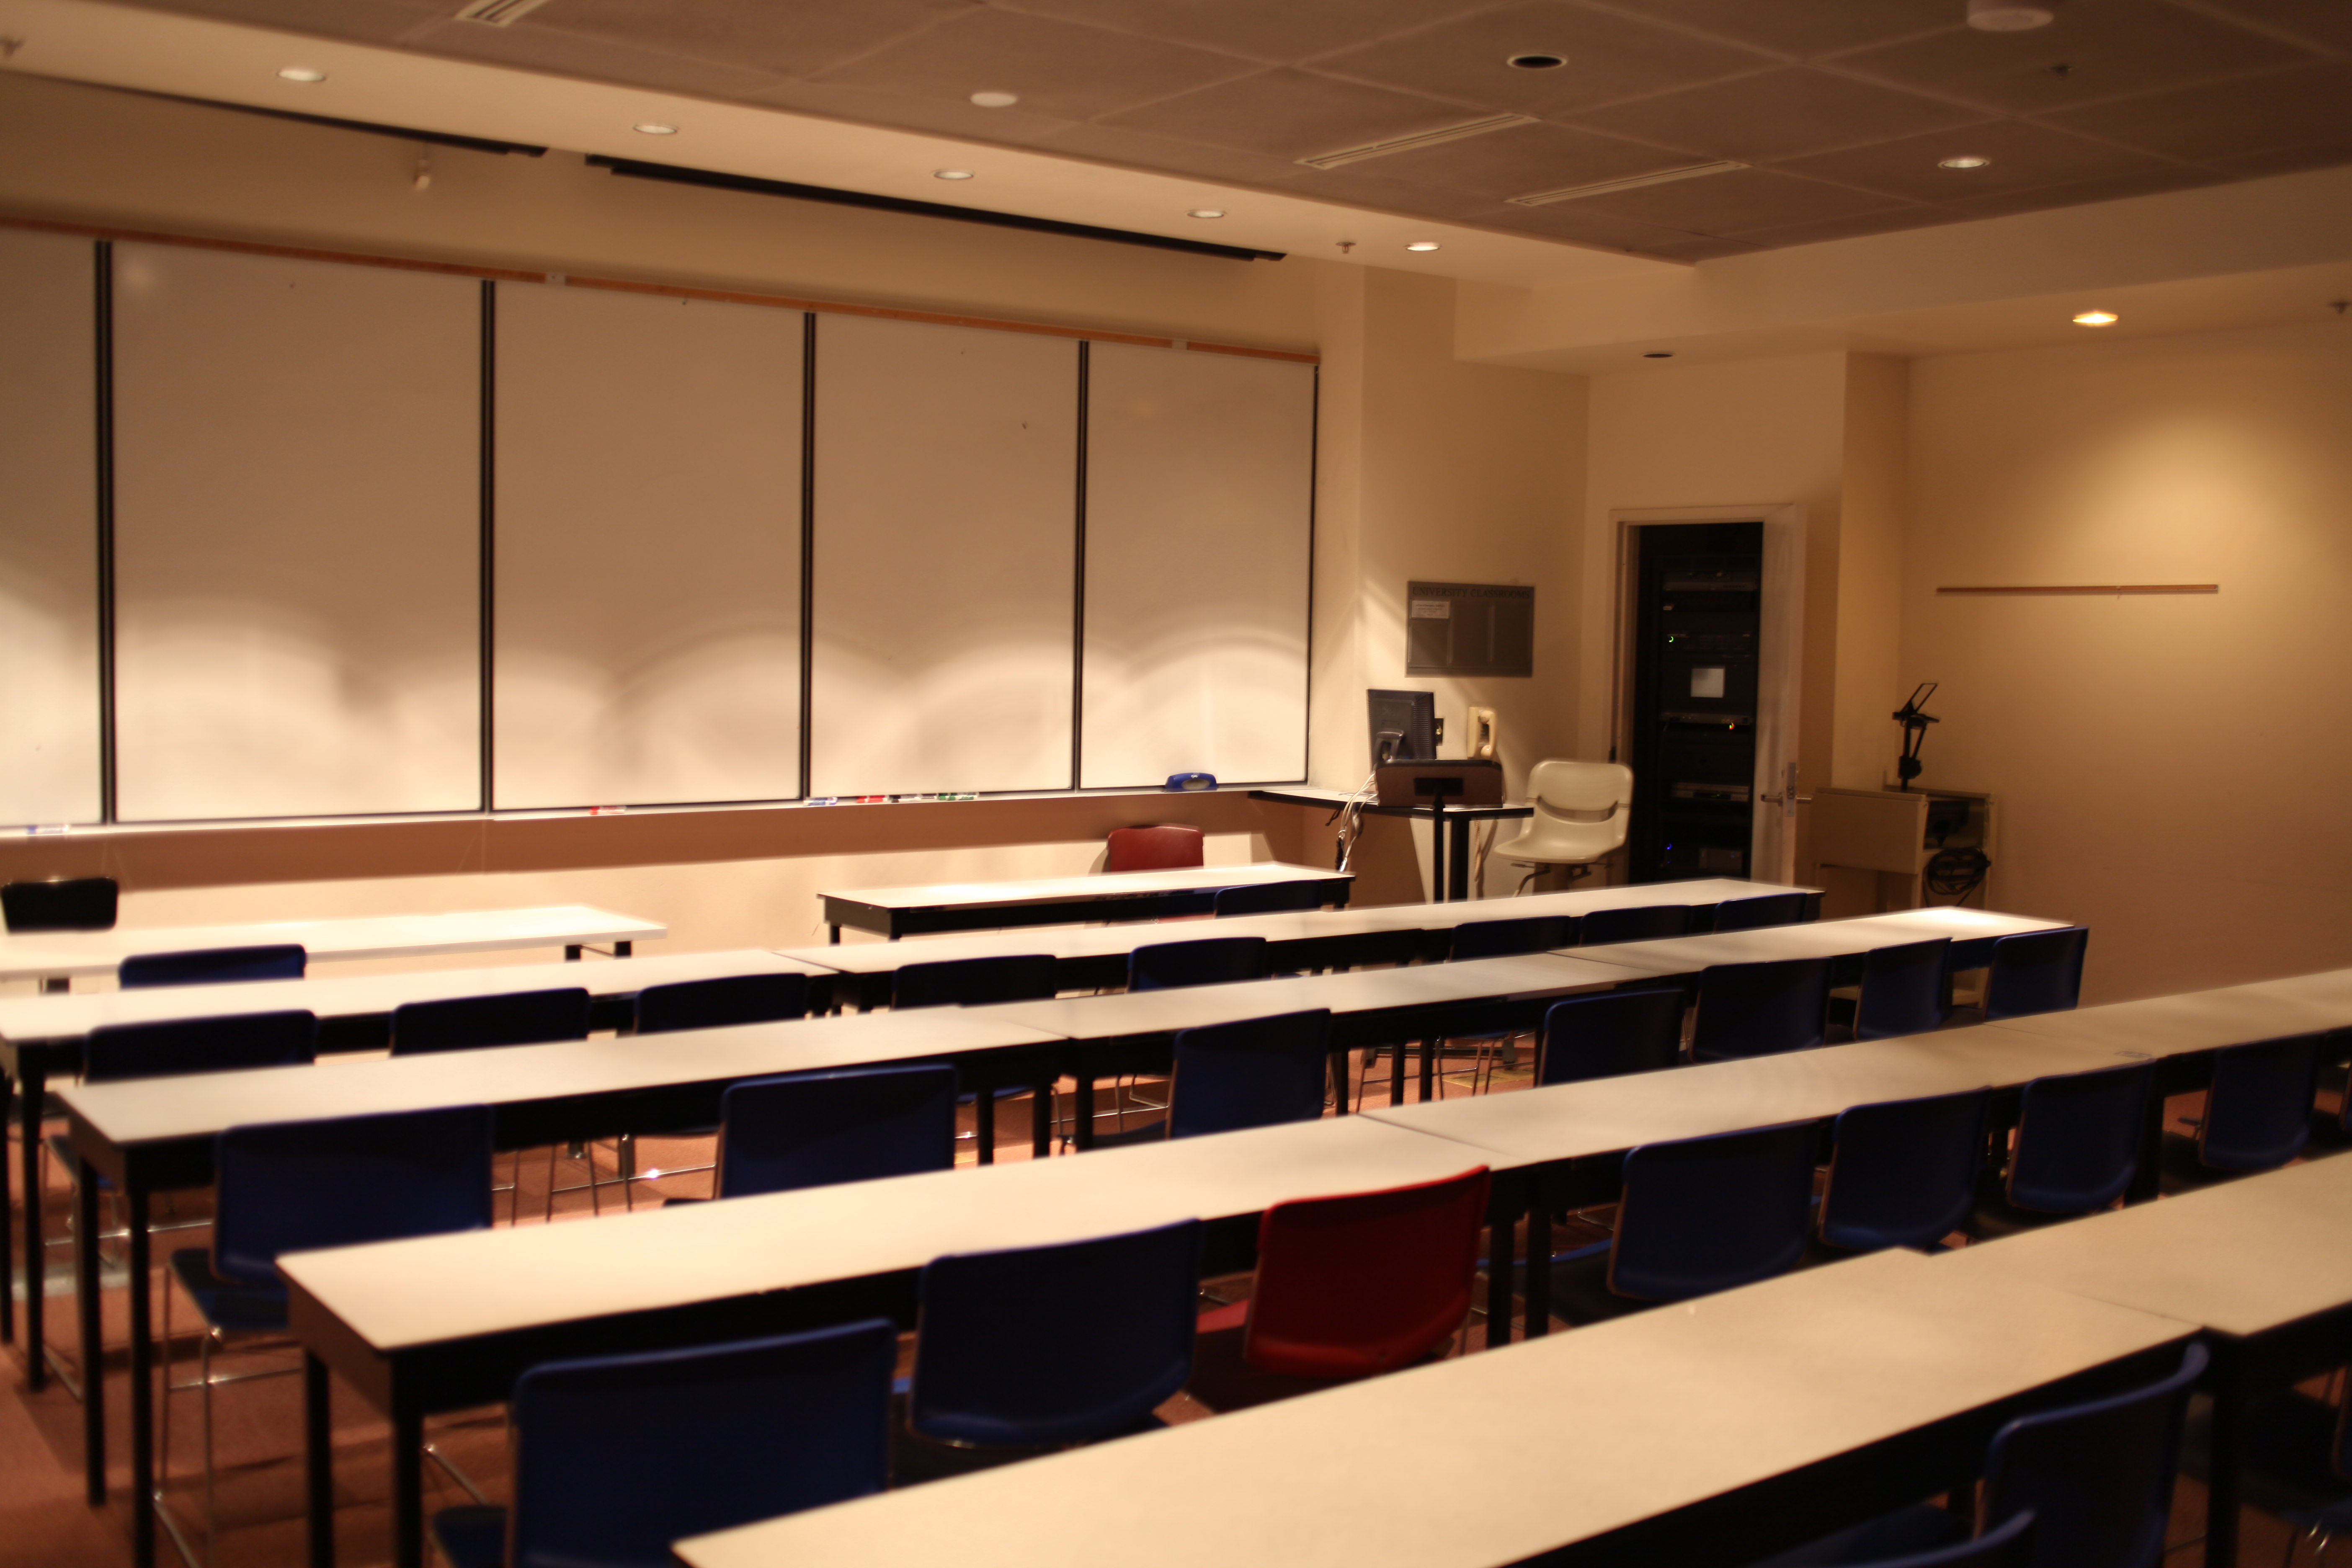 College Classroom Design Layout